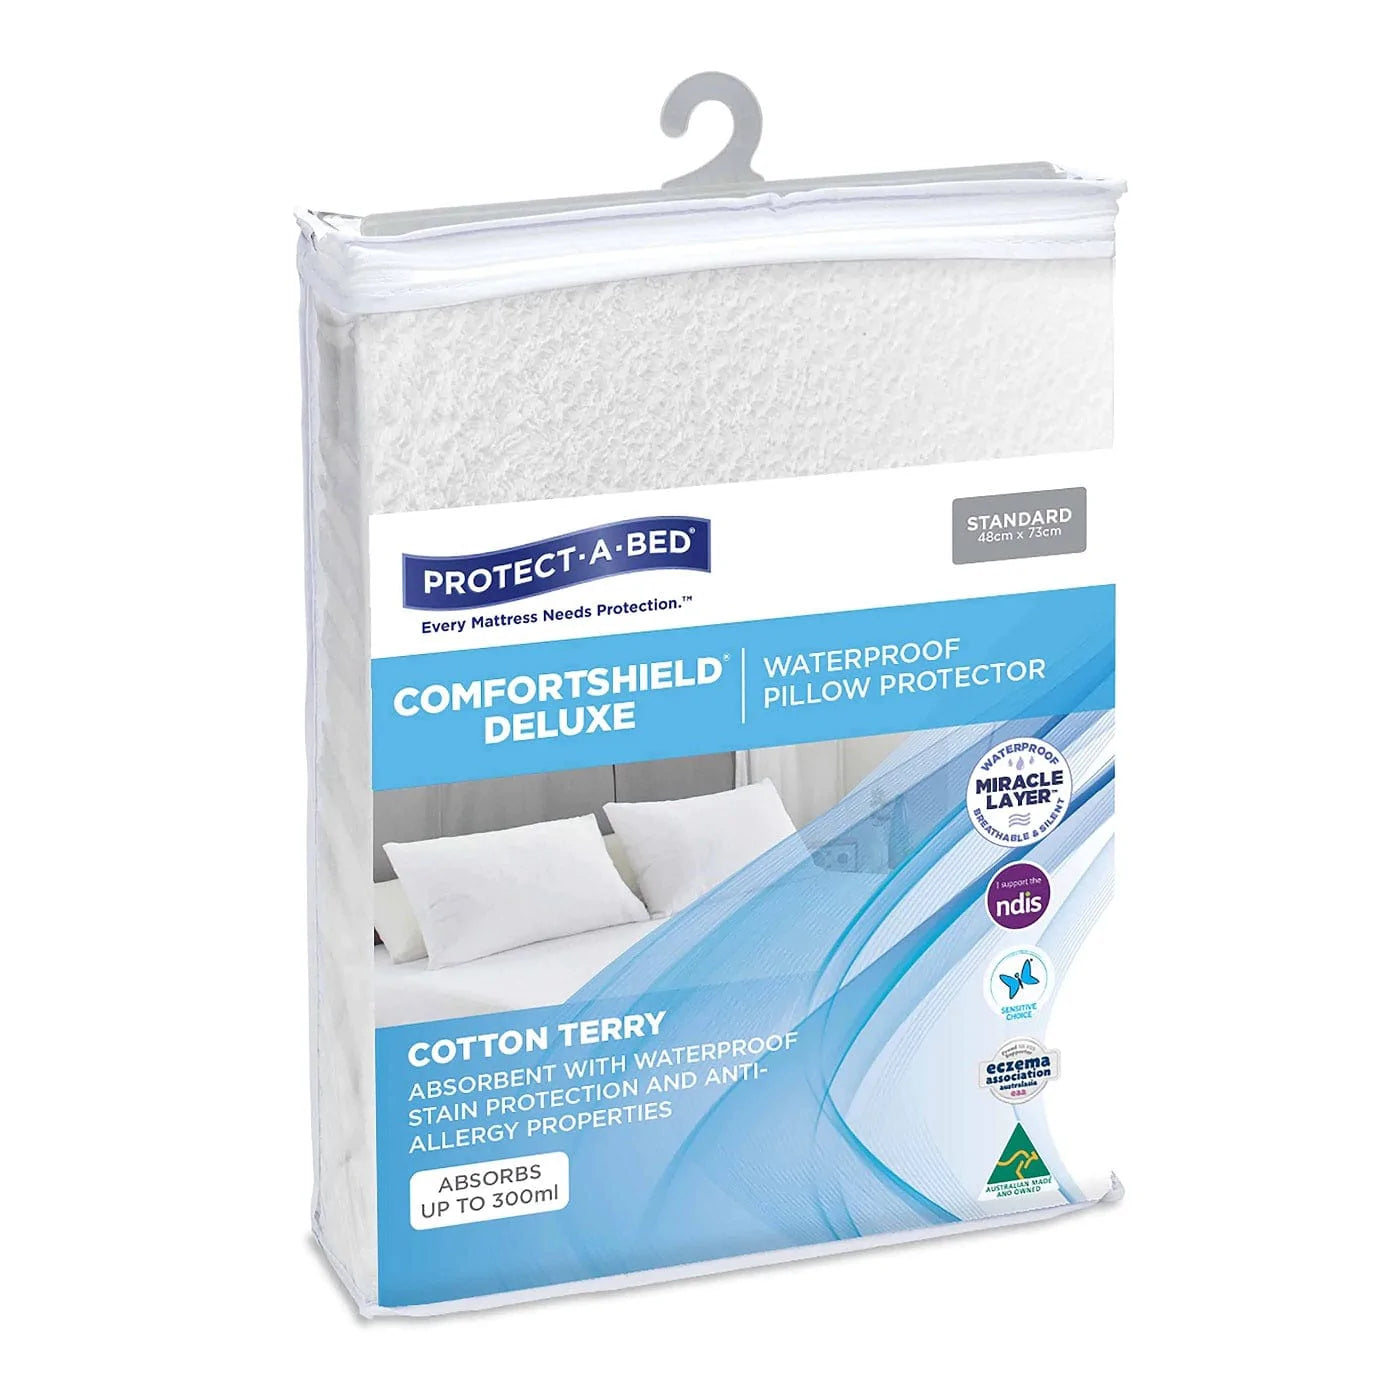 Protect A Bed Comfortshield Deluxe Pillow Protector SNUF0060PPS0__EA